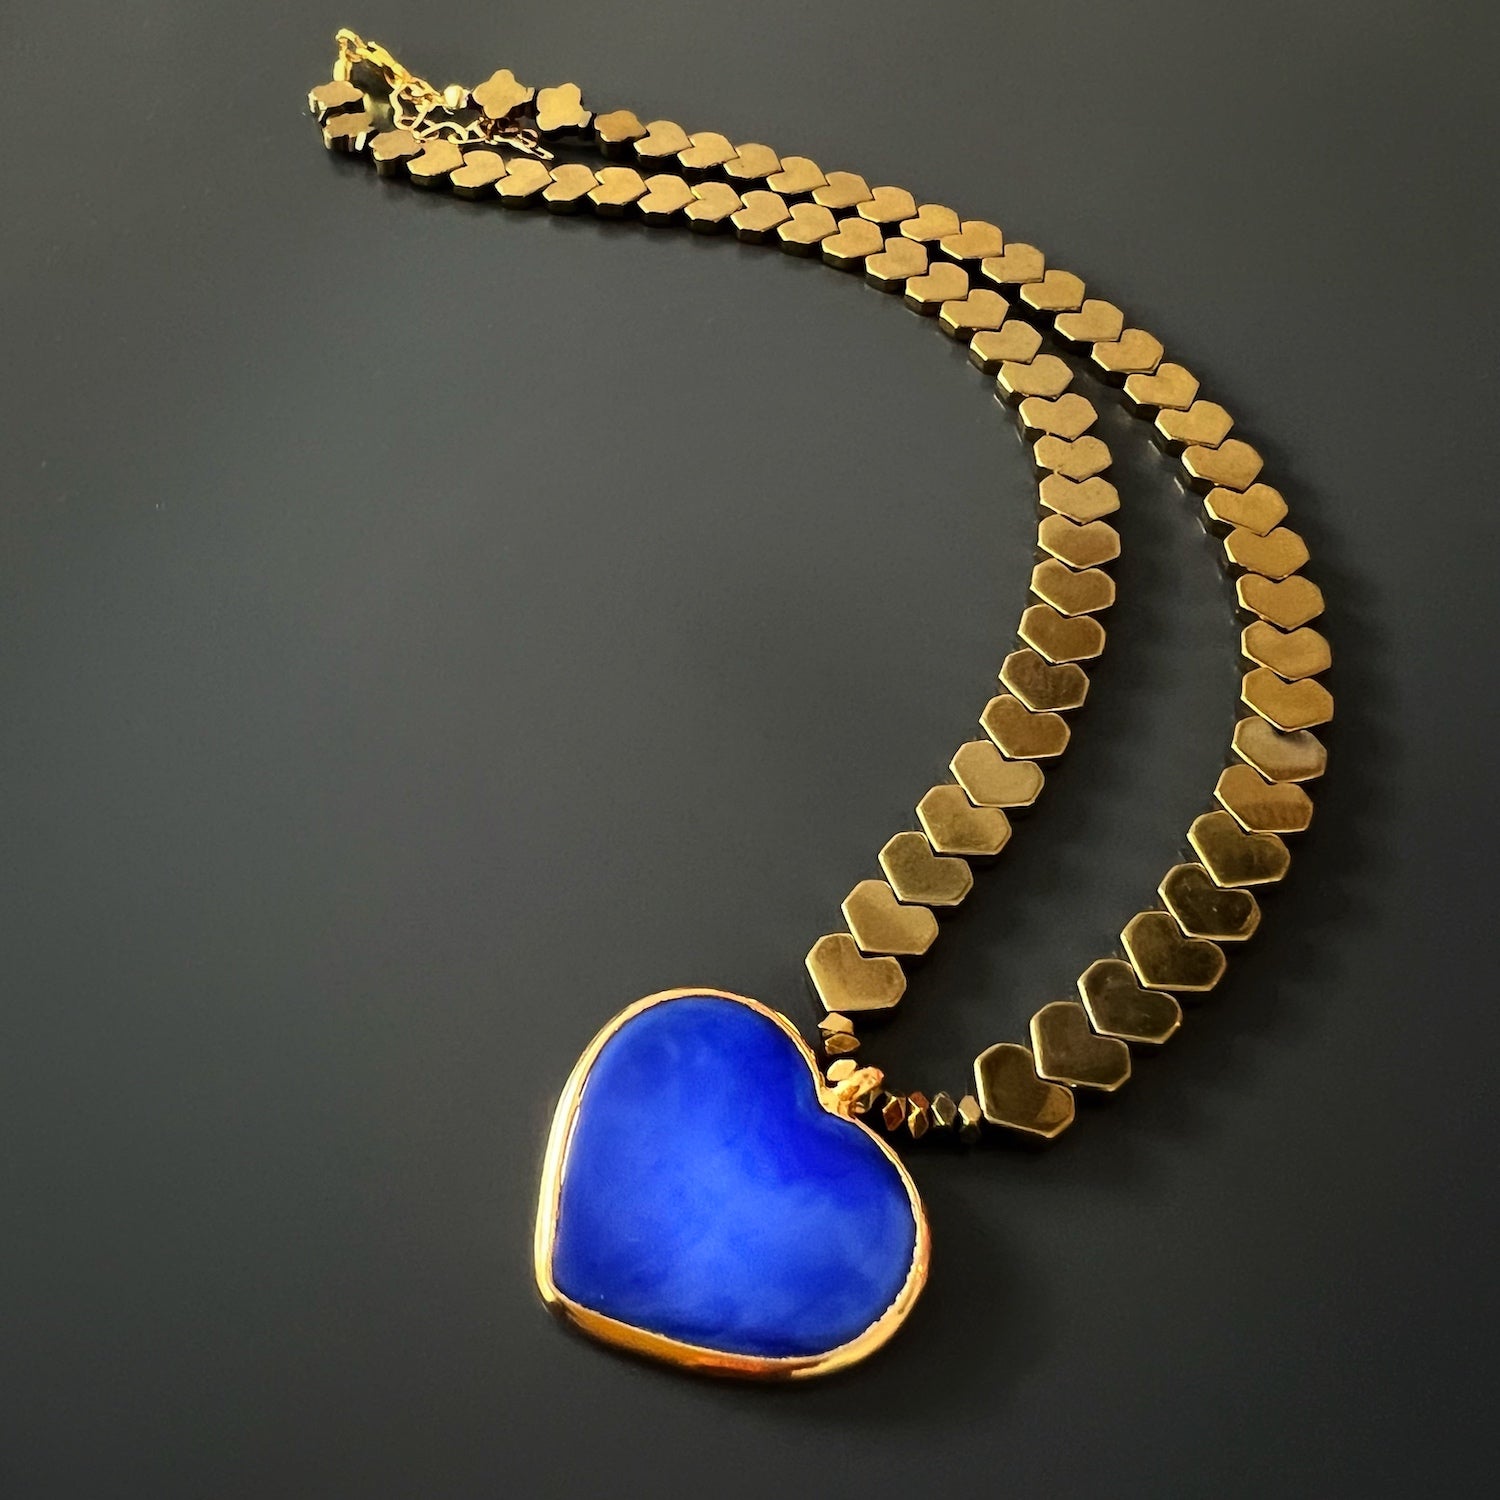 The Happy Blue Heart Necklace, displaying the arrangement of the gold color hematite beads and the blue heart ceramic pendant, illustrating the balanced and harmonious combination of colors and textures.